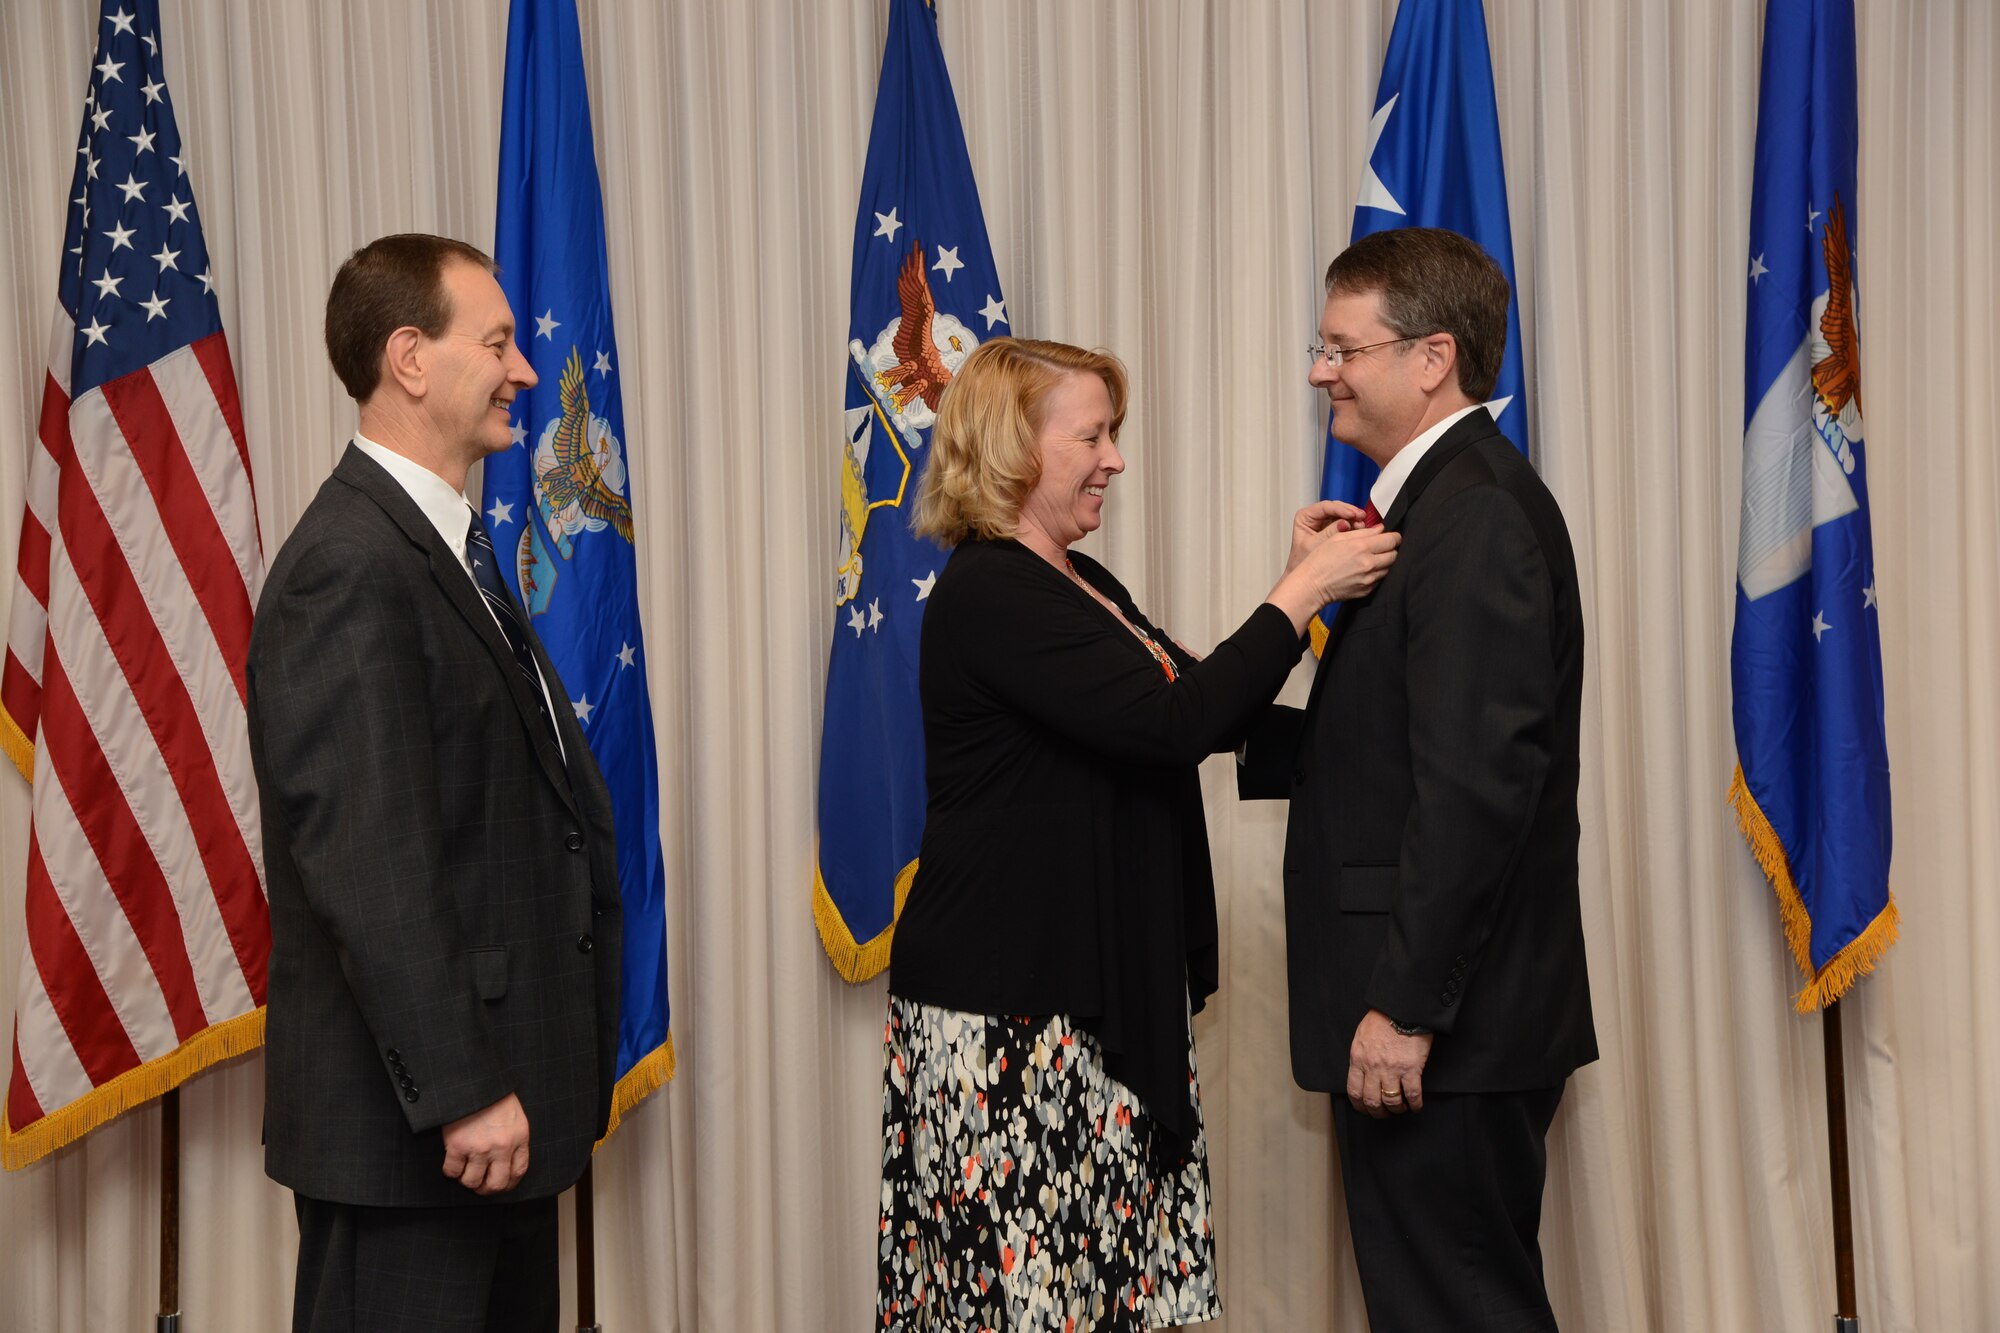 Lisa Alsup pins the Senior Executive Service pin onto her husband, Steven Alsup’s, lapel. The promotion and appointment of leadership ceremony on March 8 in the Anaconda Room in Bldg. 3001 saw Mr. Alsup not only get promoted into Senior Executive Service, but also become the new director of the 448th Supply Chain Management Wing. (Air Force photo by Kelly White)